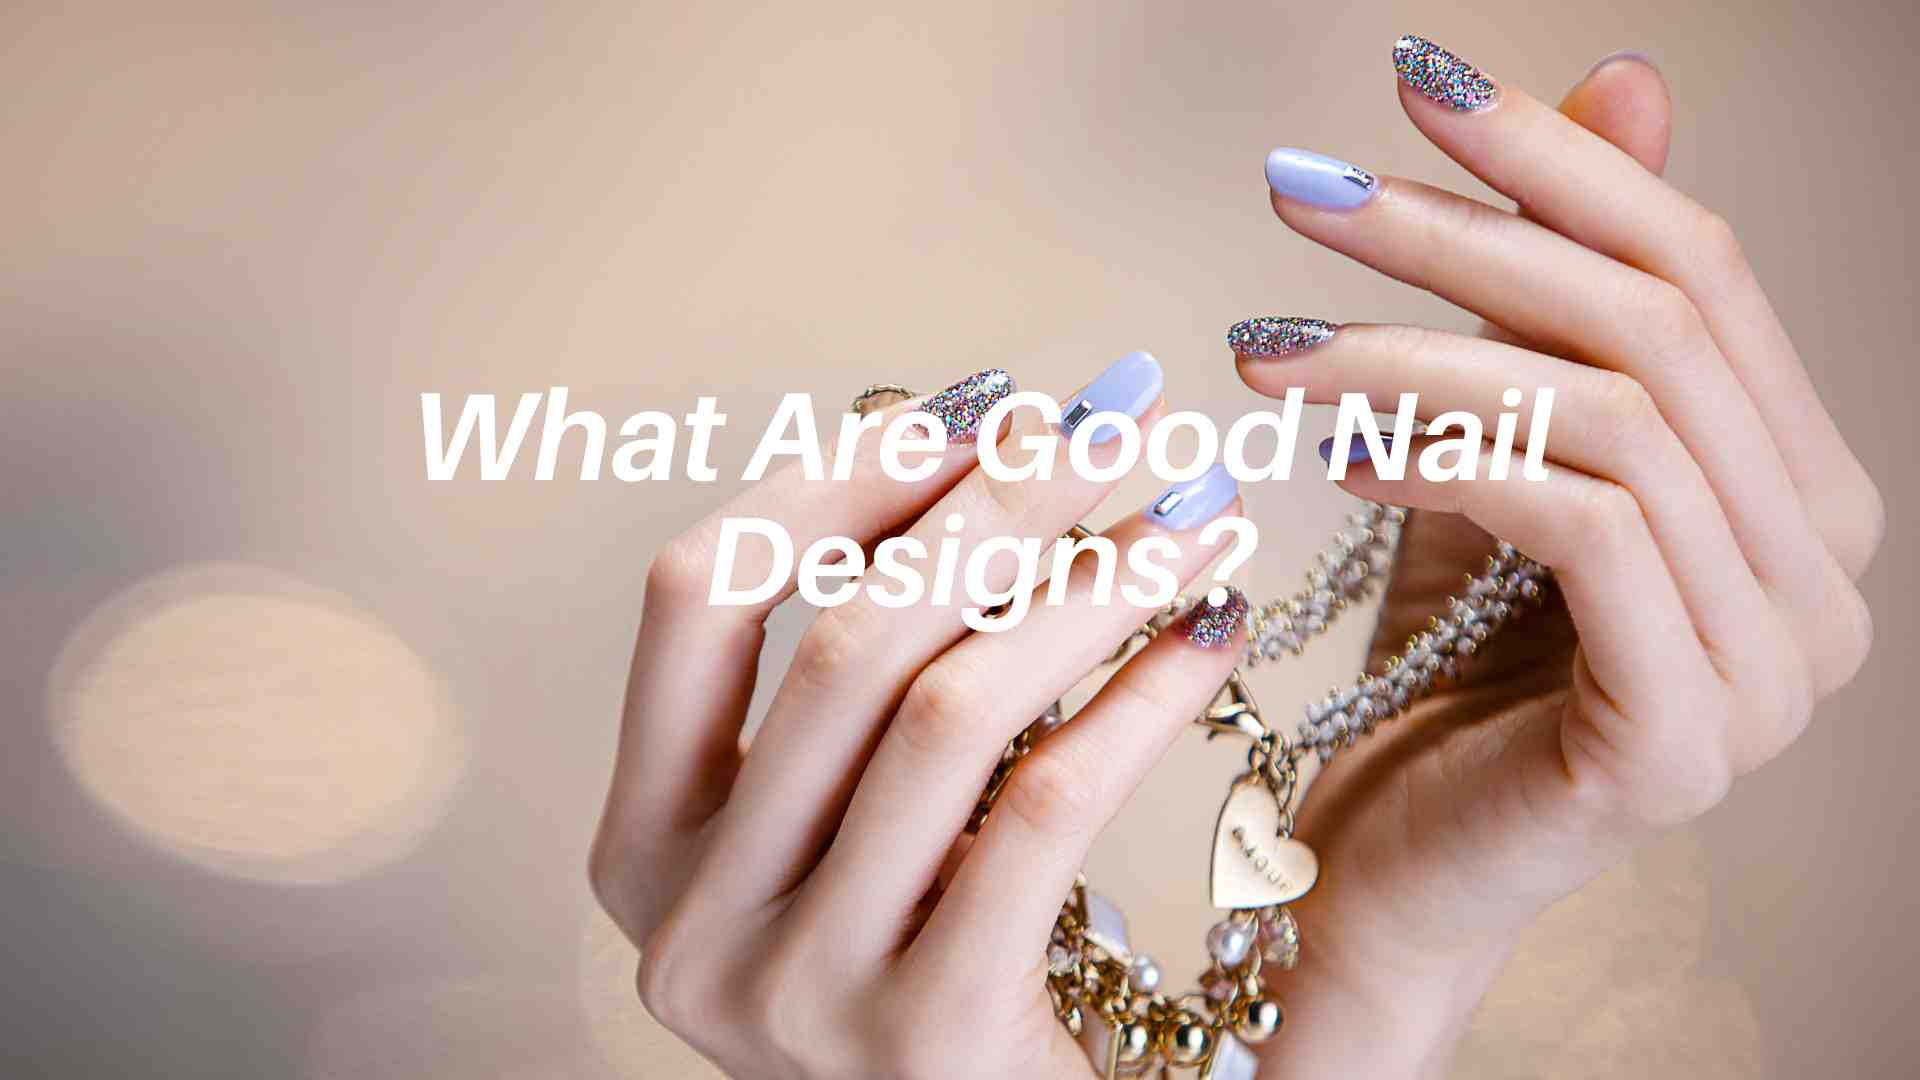 What Are Good Nail Designs